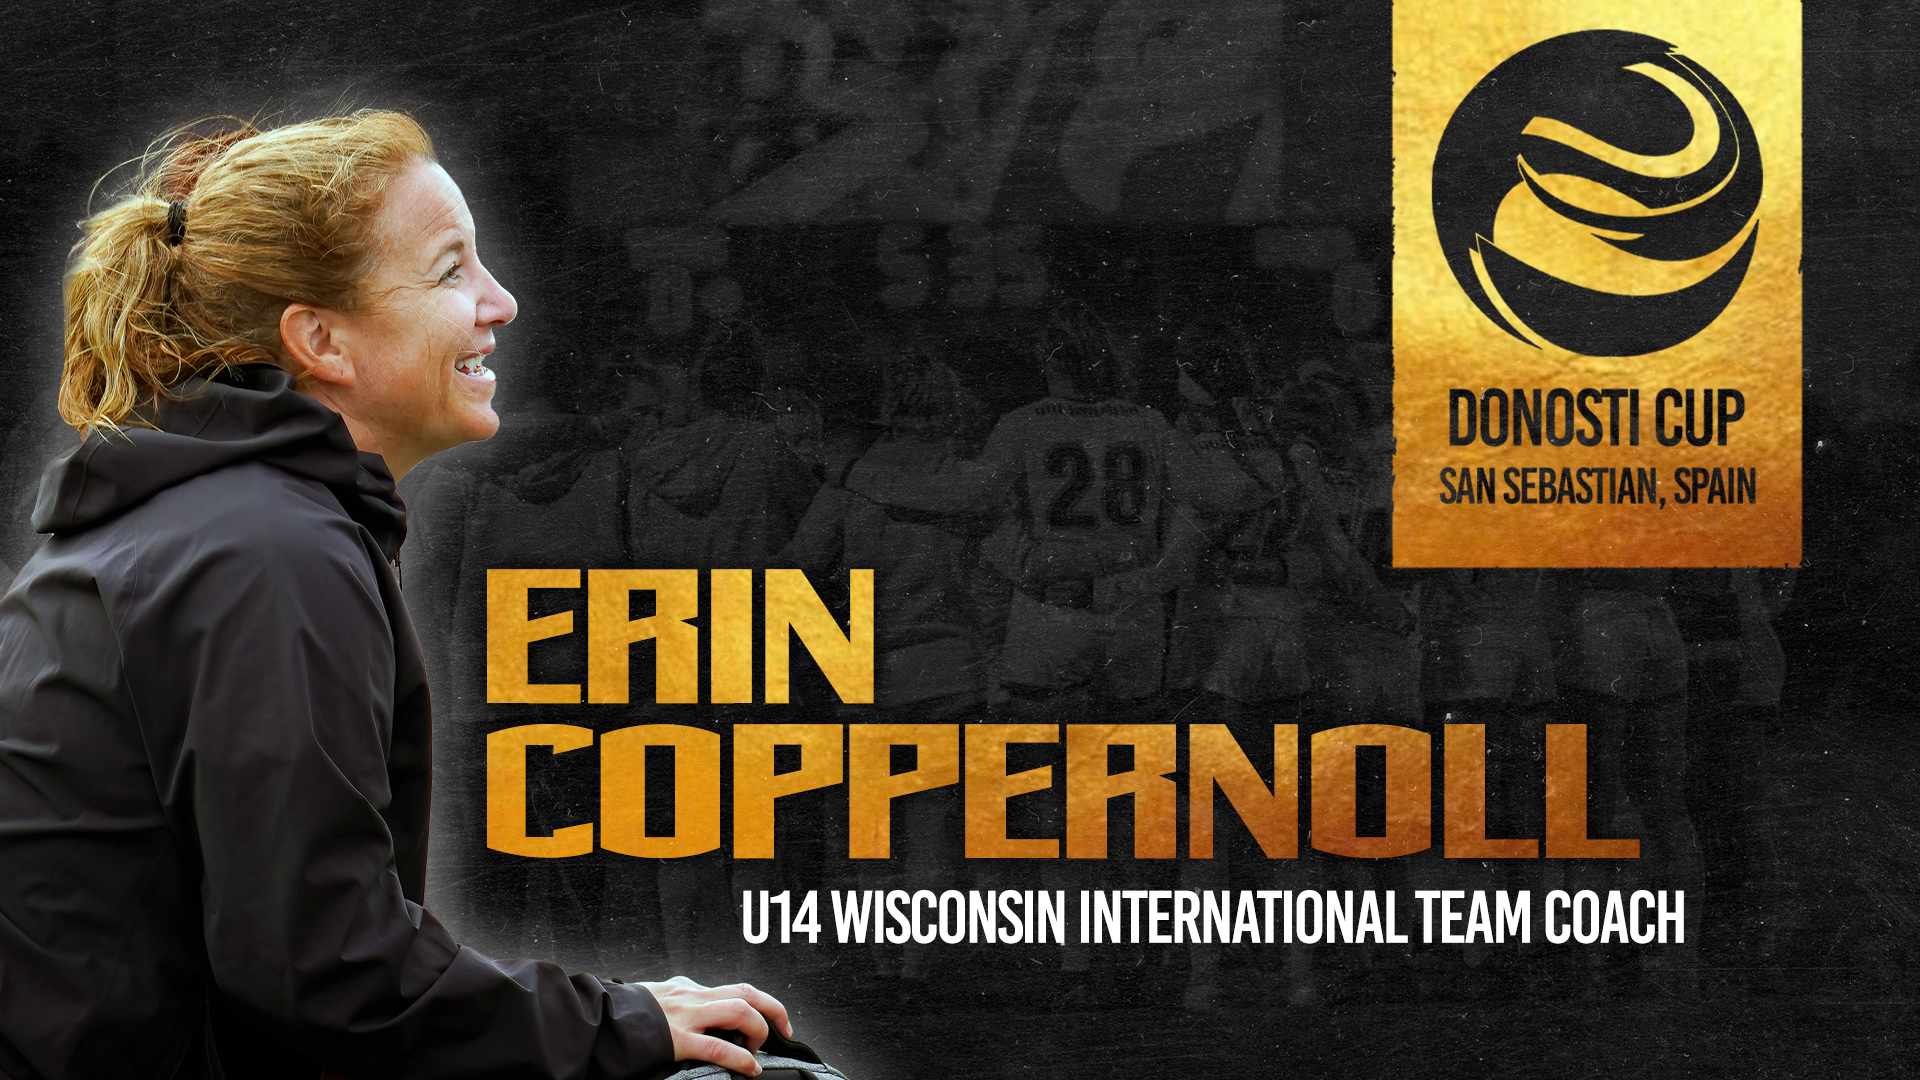 Coppernoll to Coach Wisconsin International Soccer at Donosti Cup